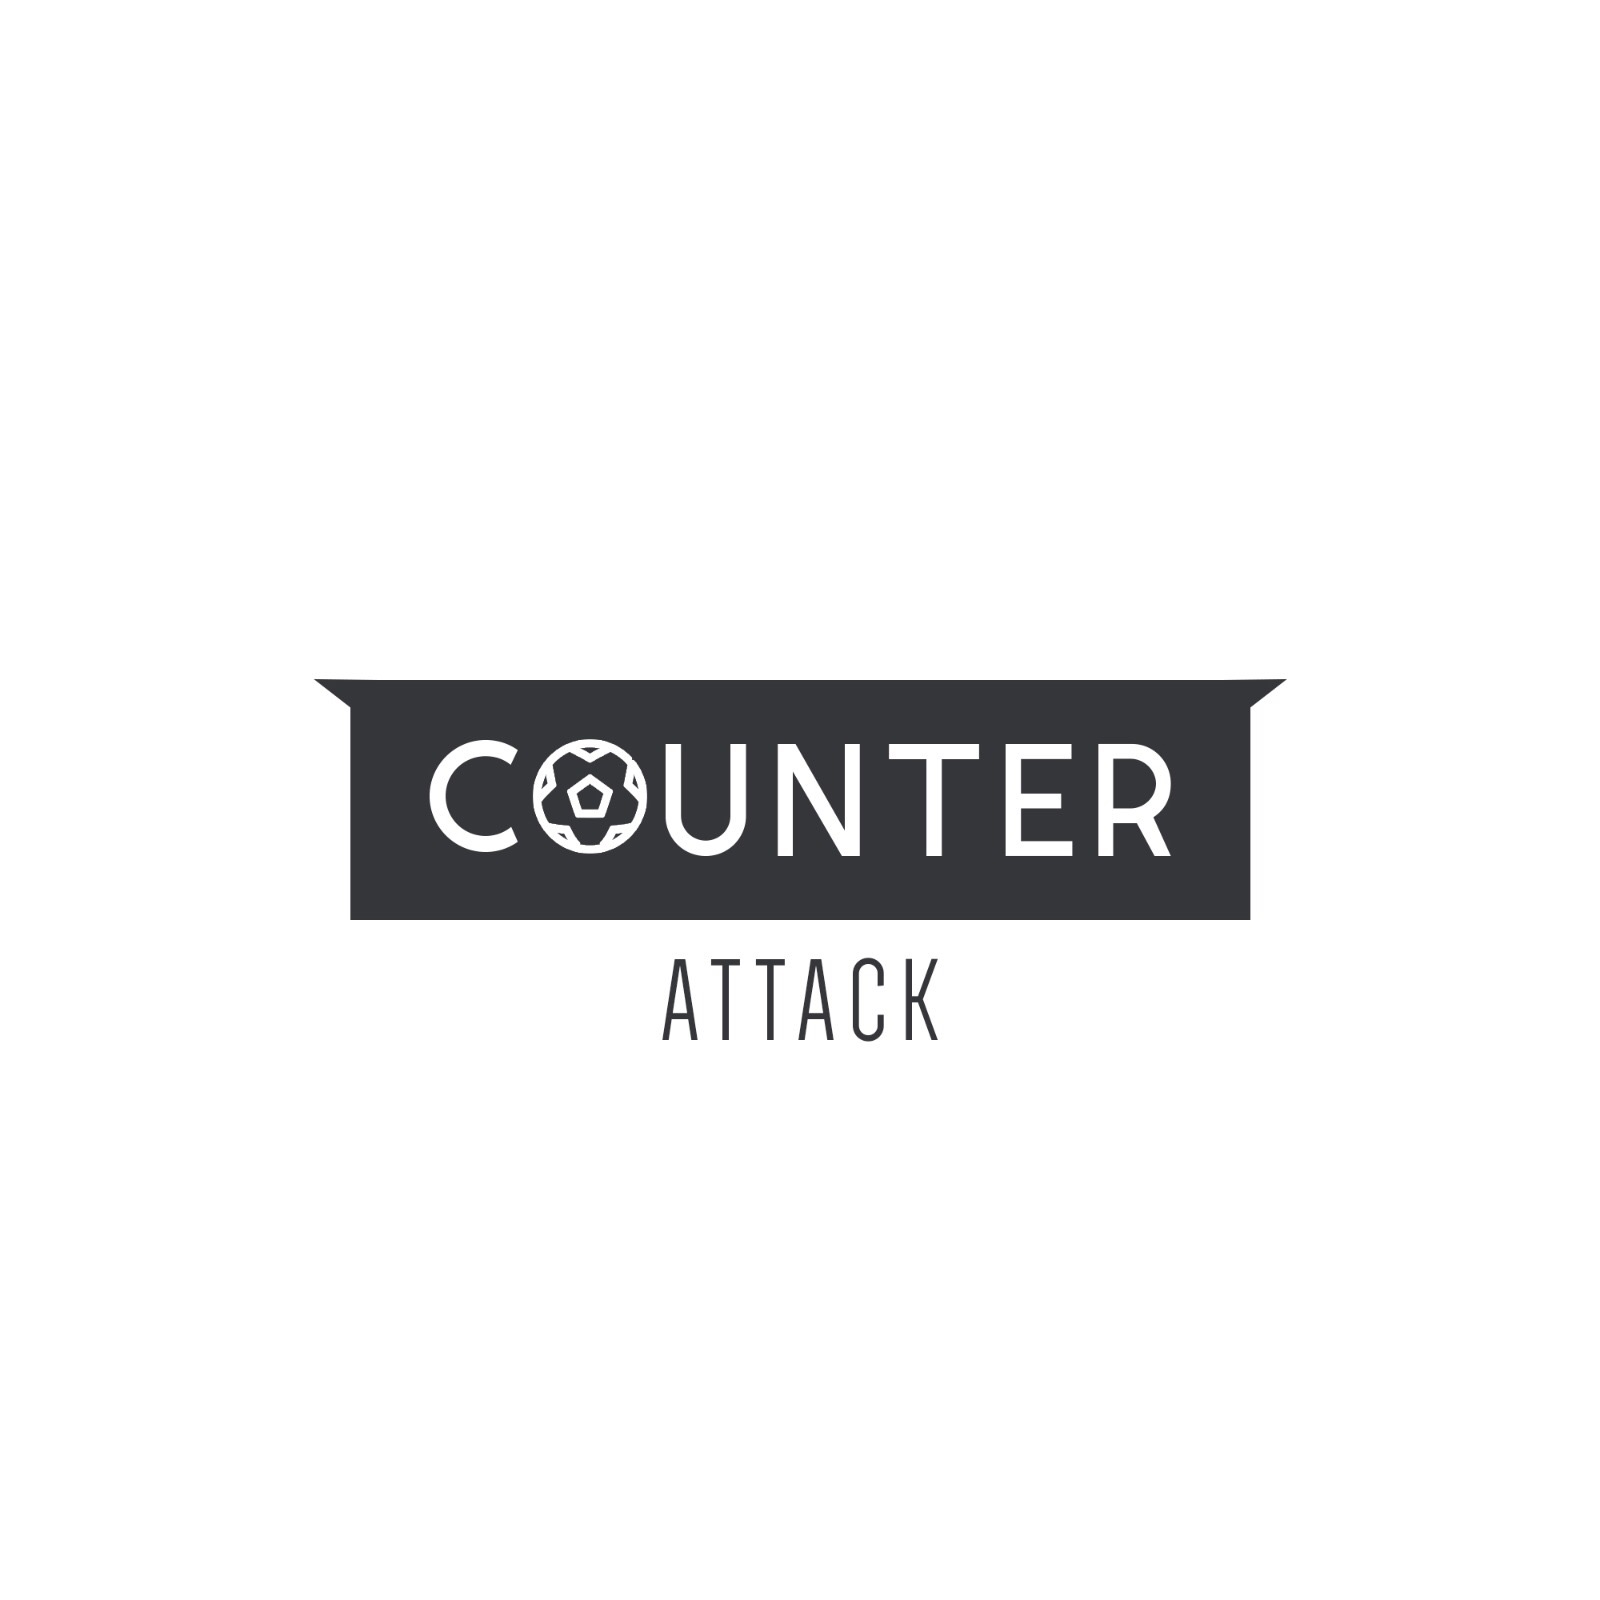 Counter Attack - Episode 77 - It's All Going Off In This Transfer Window